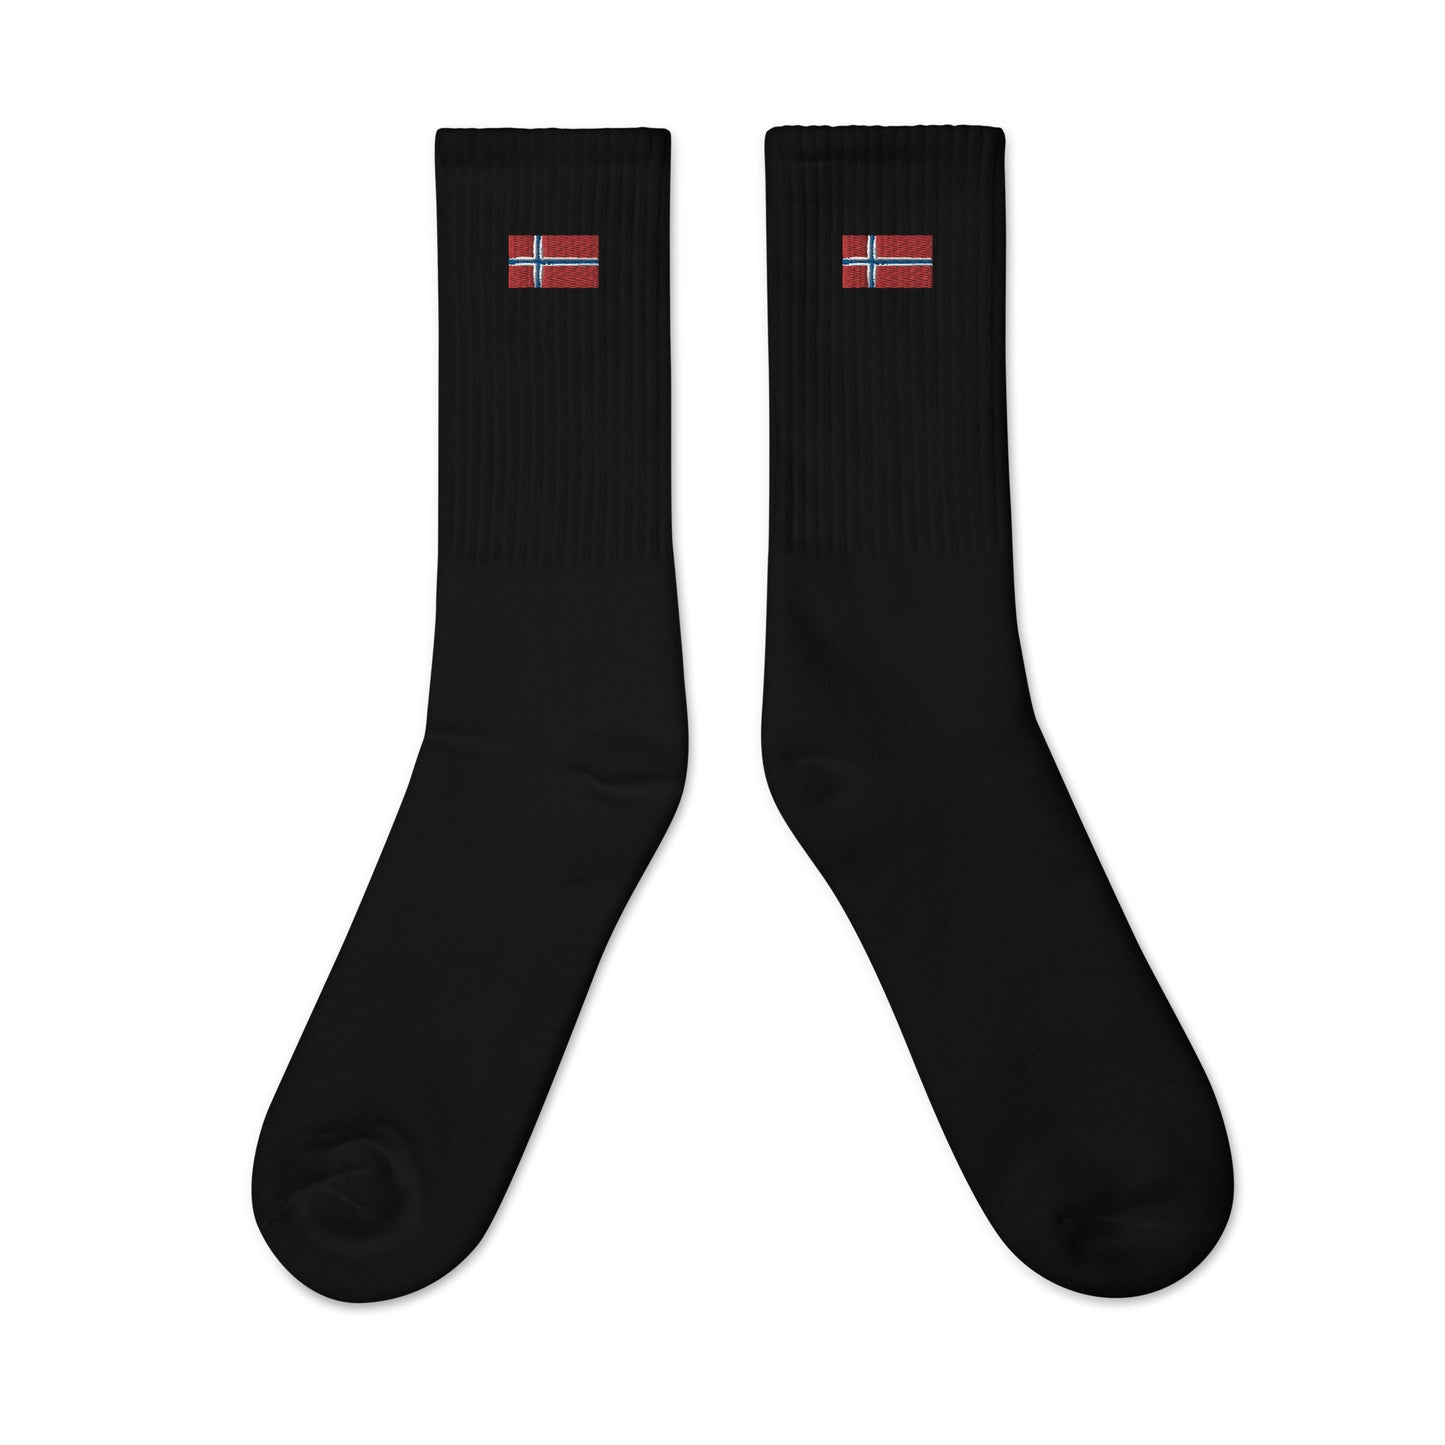  socks-from-the-front-with-a-norwegian flag